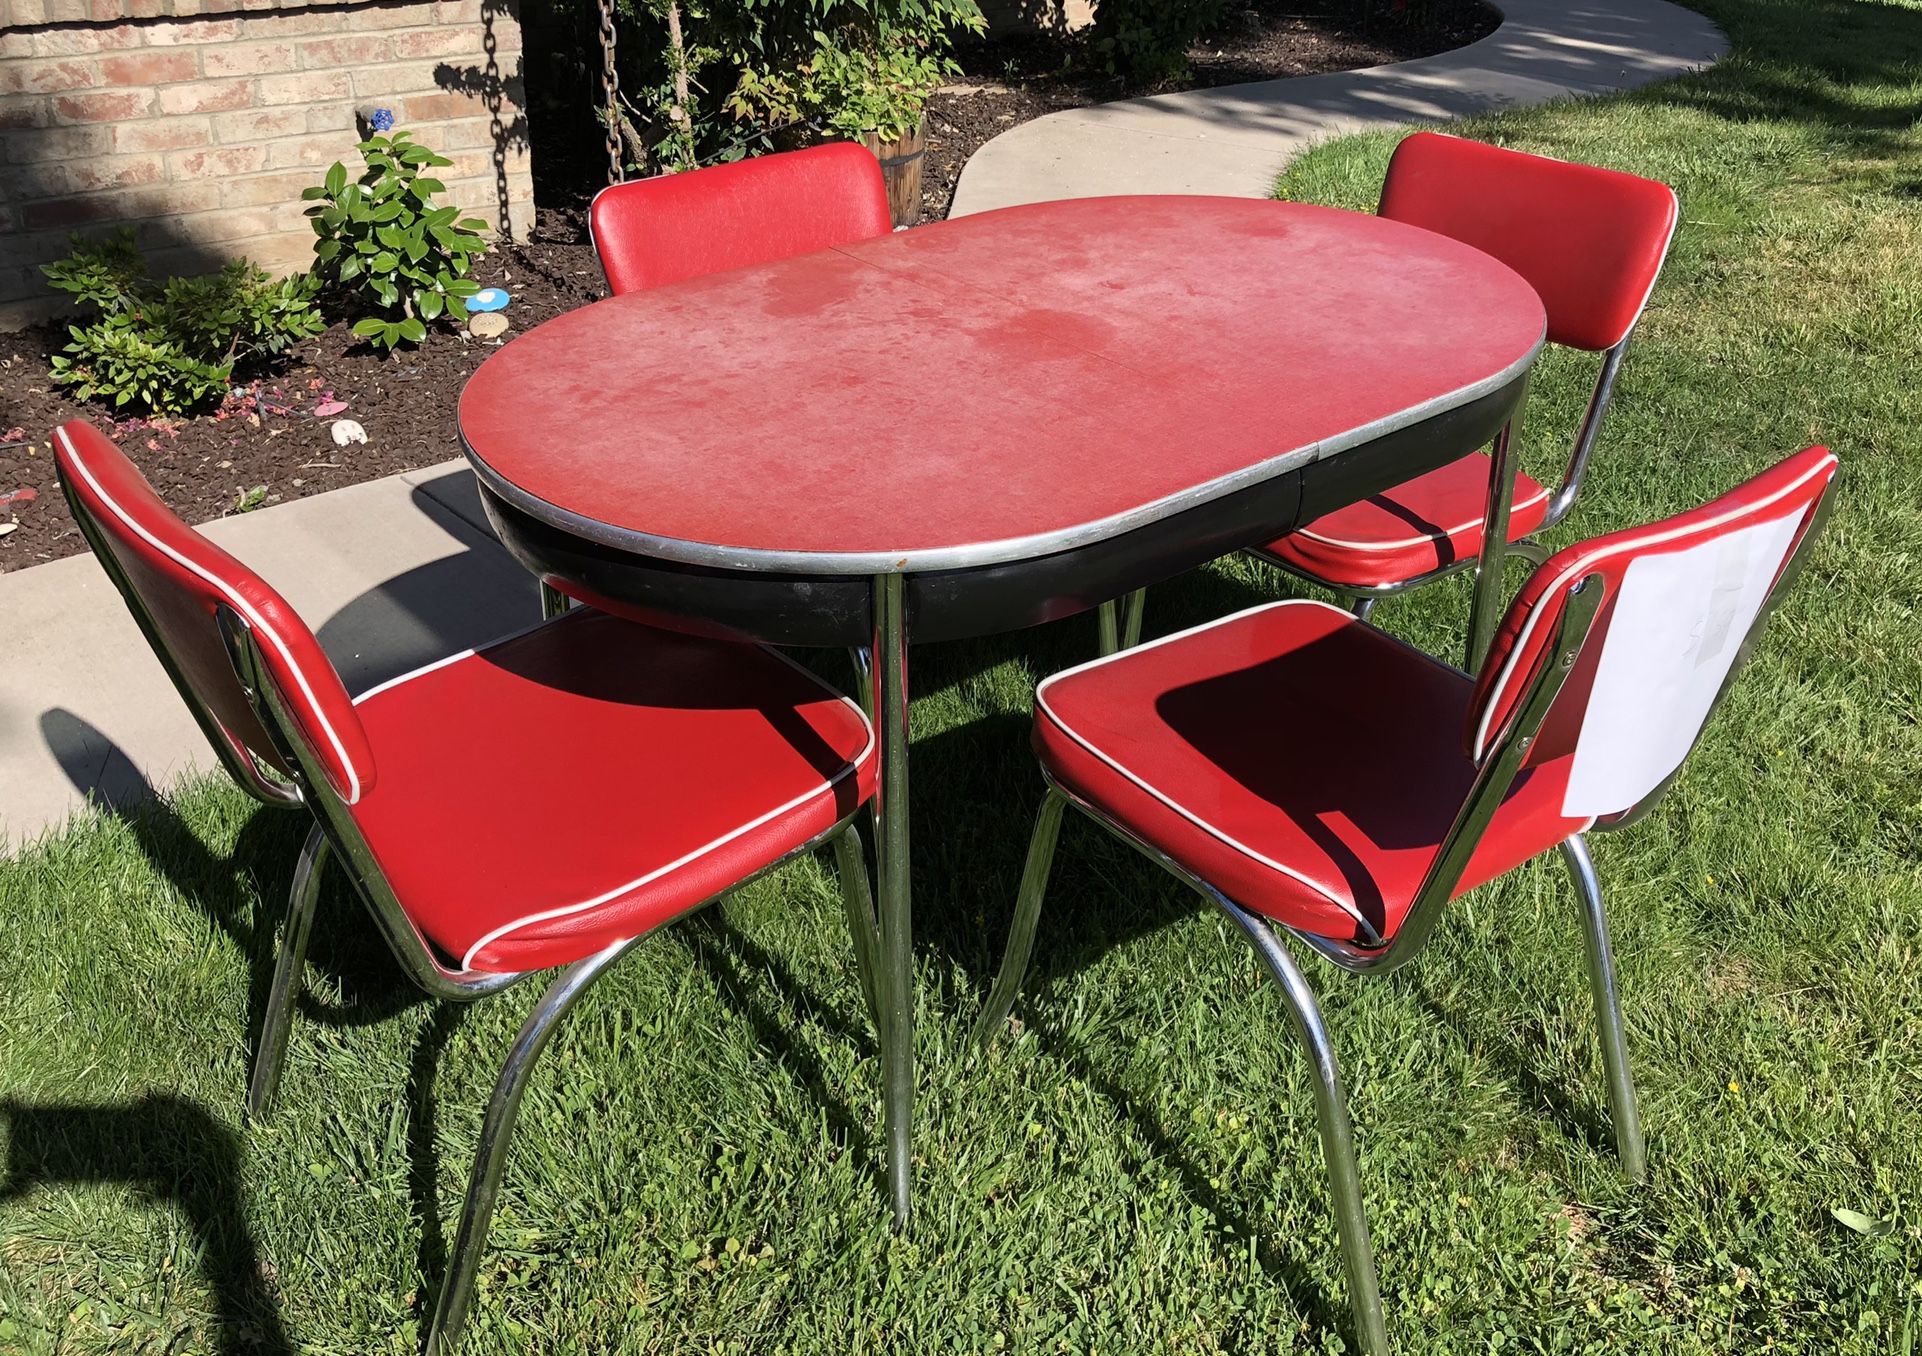 Retro Table & chairs - red